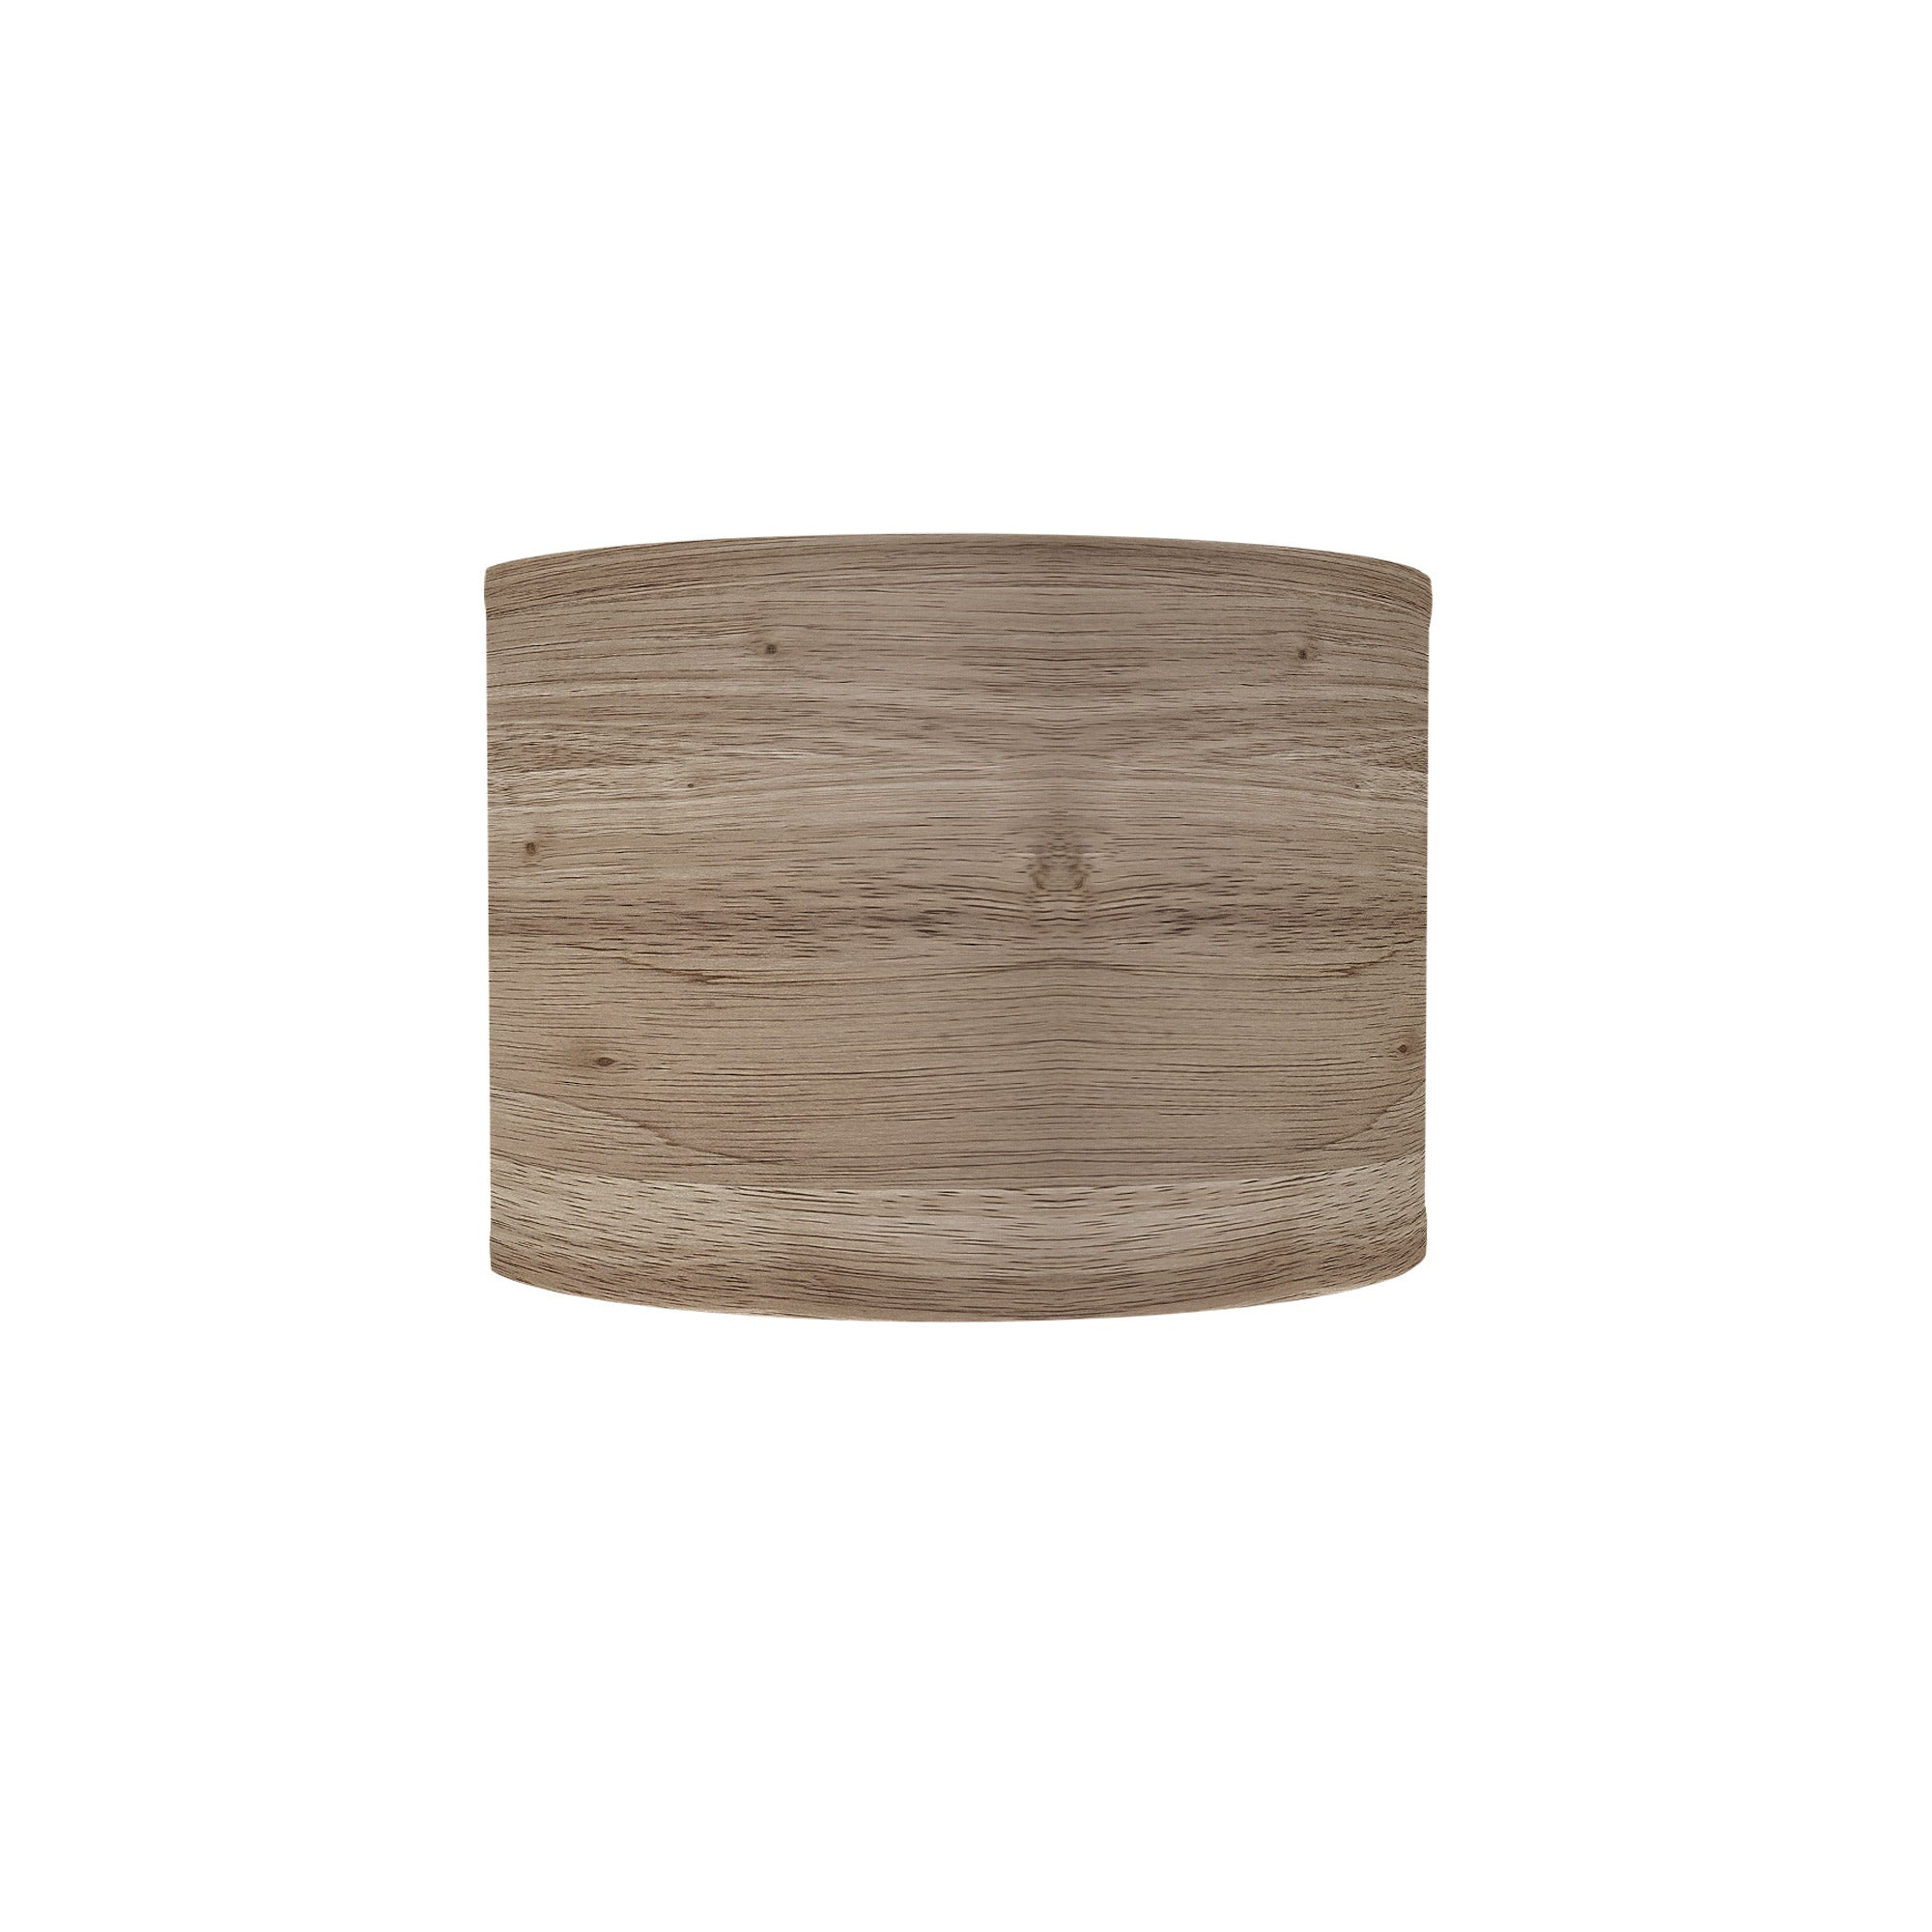 The Bryce Wall Sconce from Seascape Fixtures with a photo veneer shade in natural color.